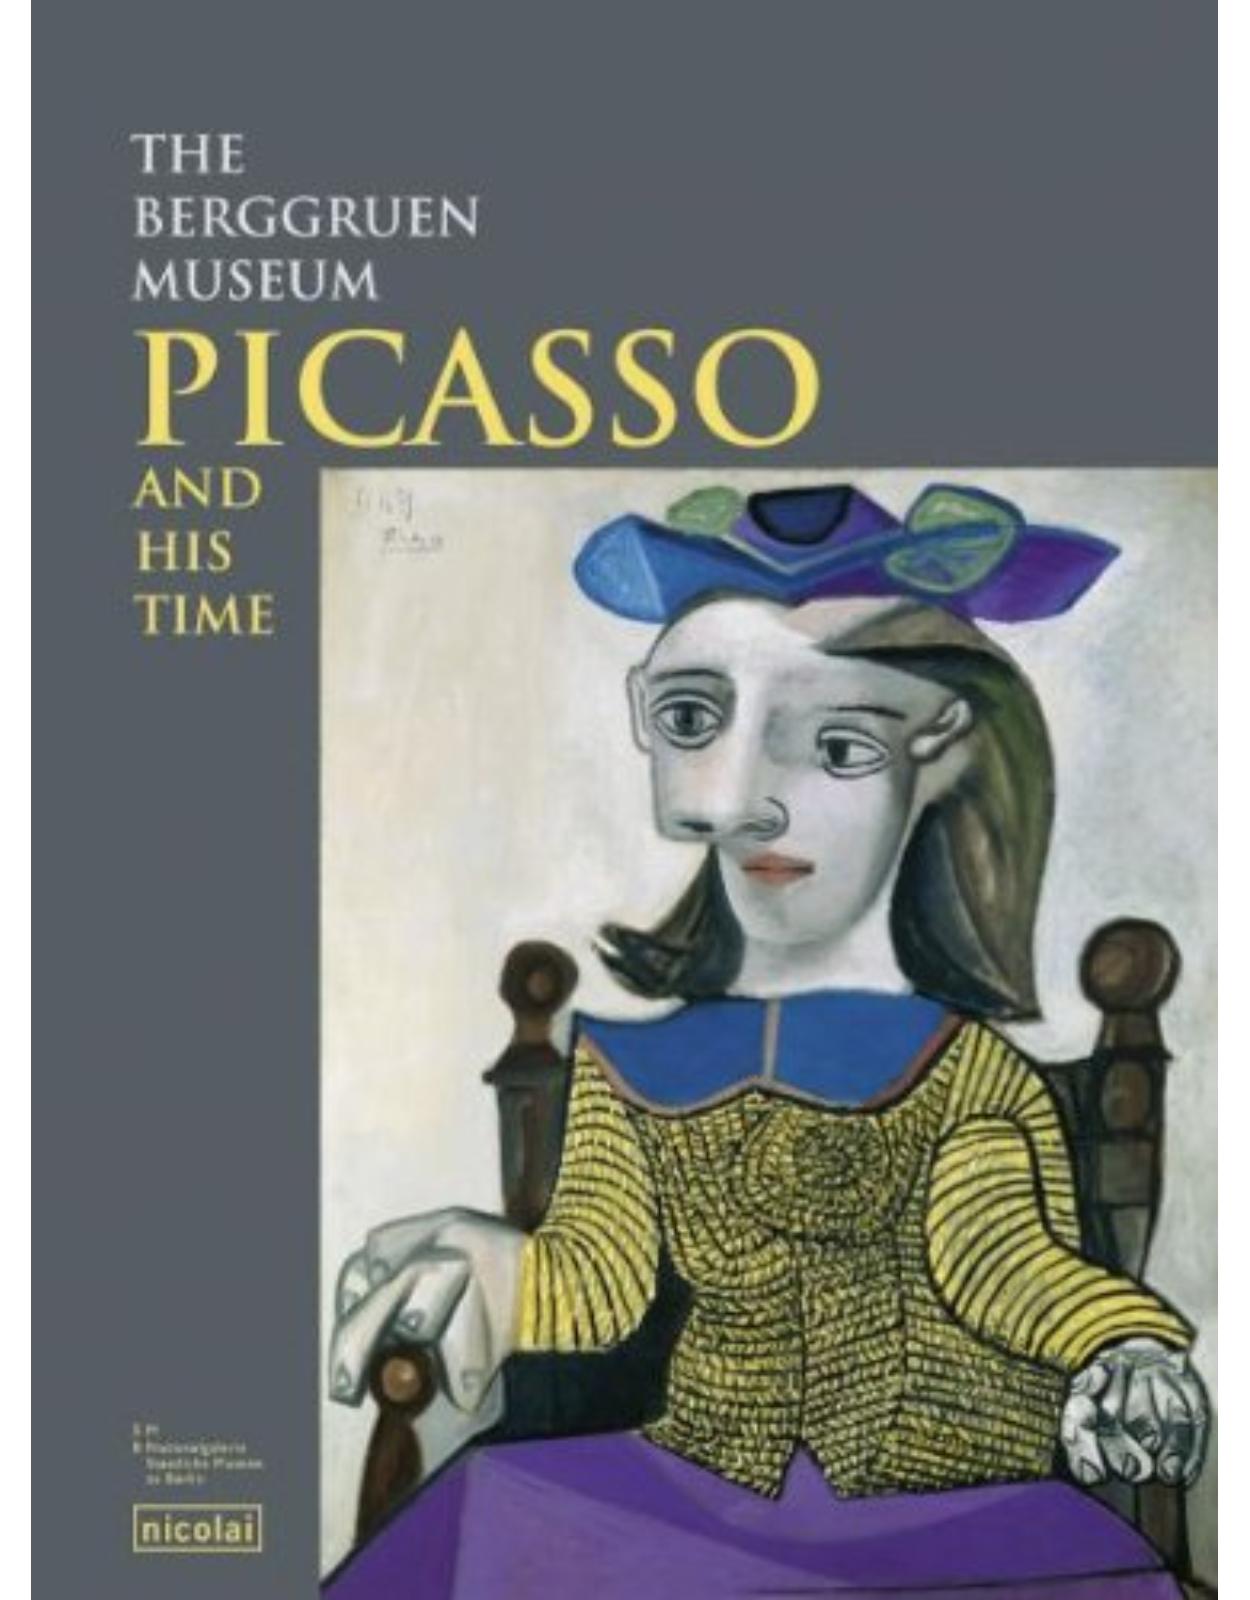 Picasso and his time: The Berggruen Collection